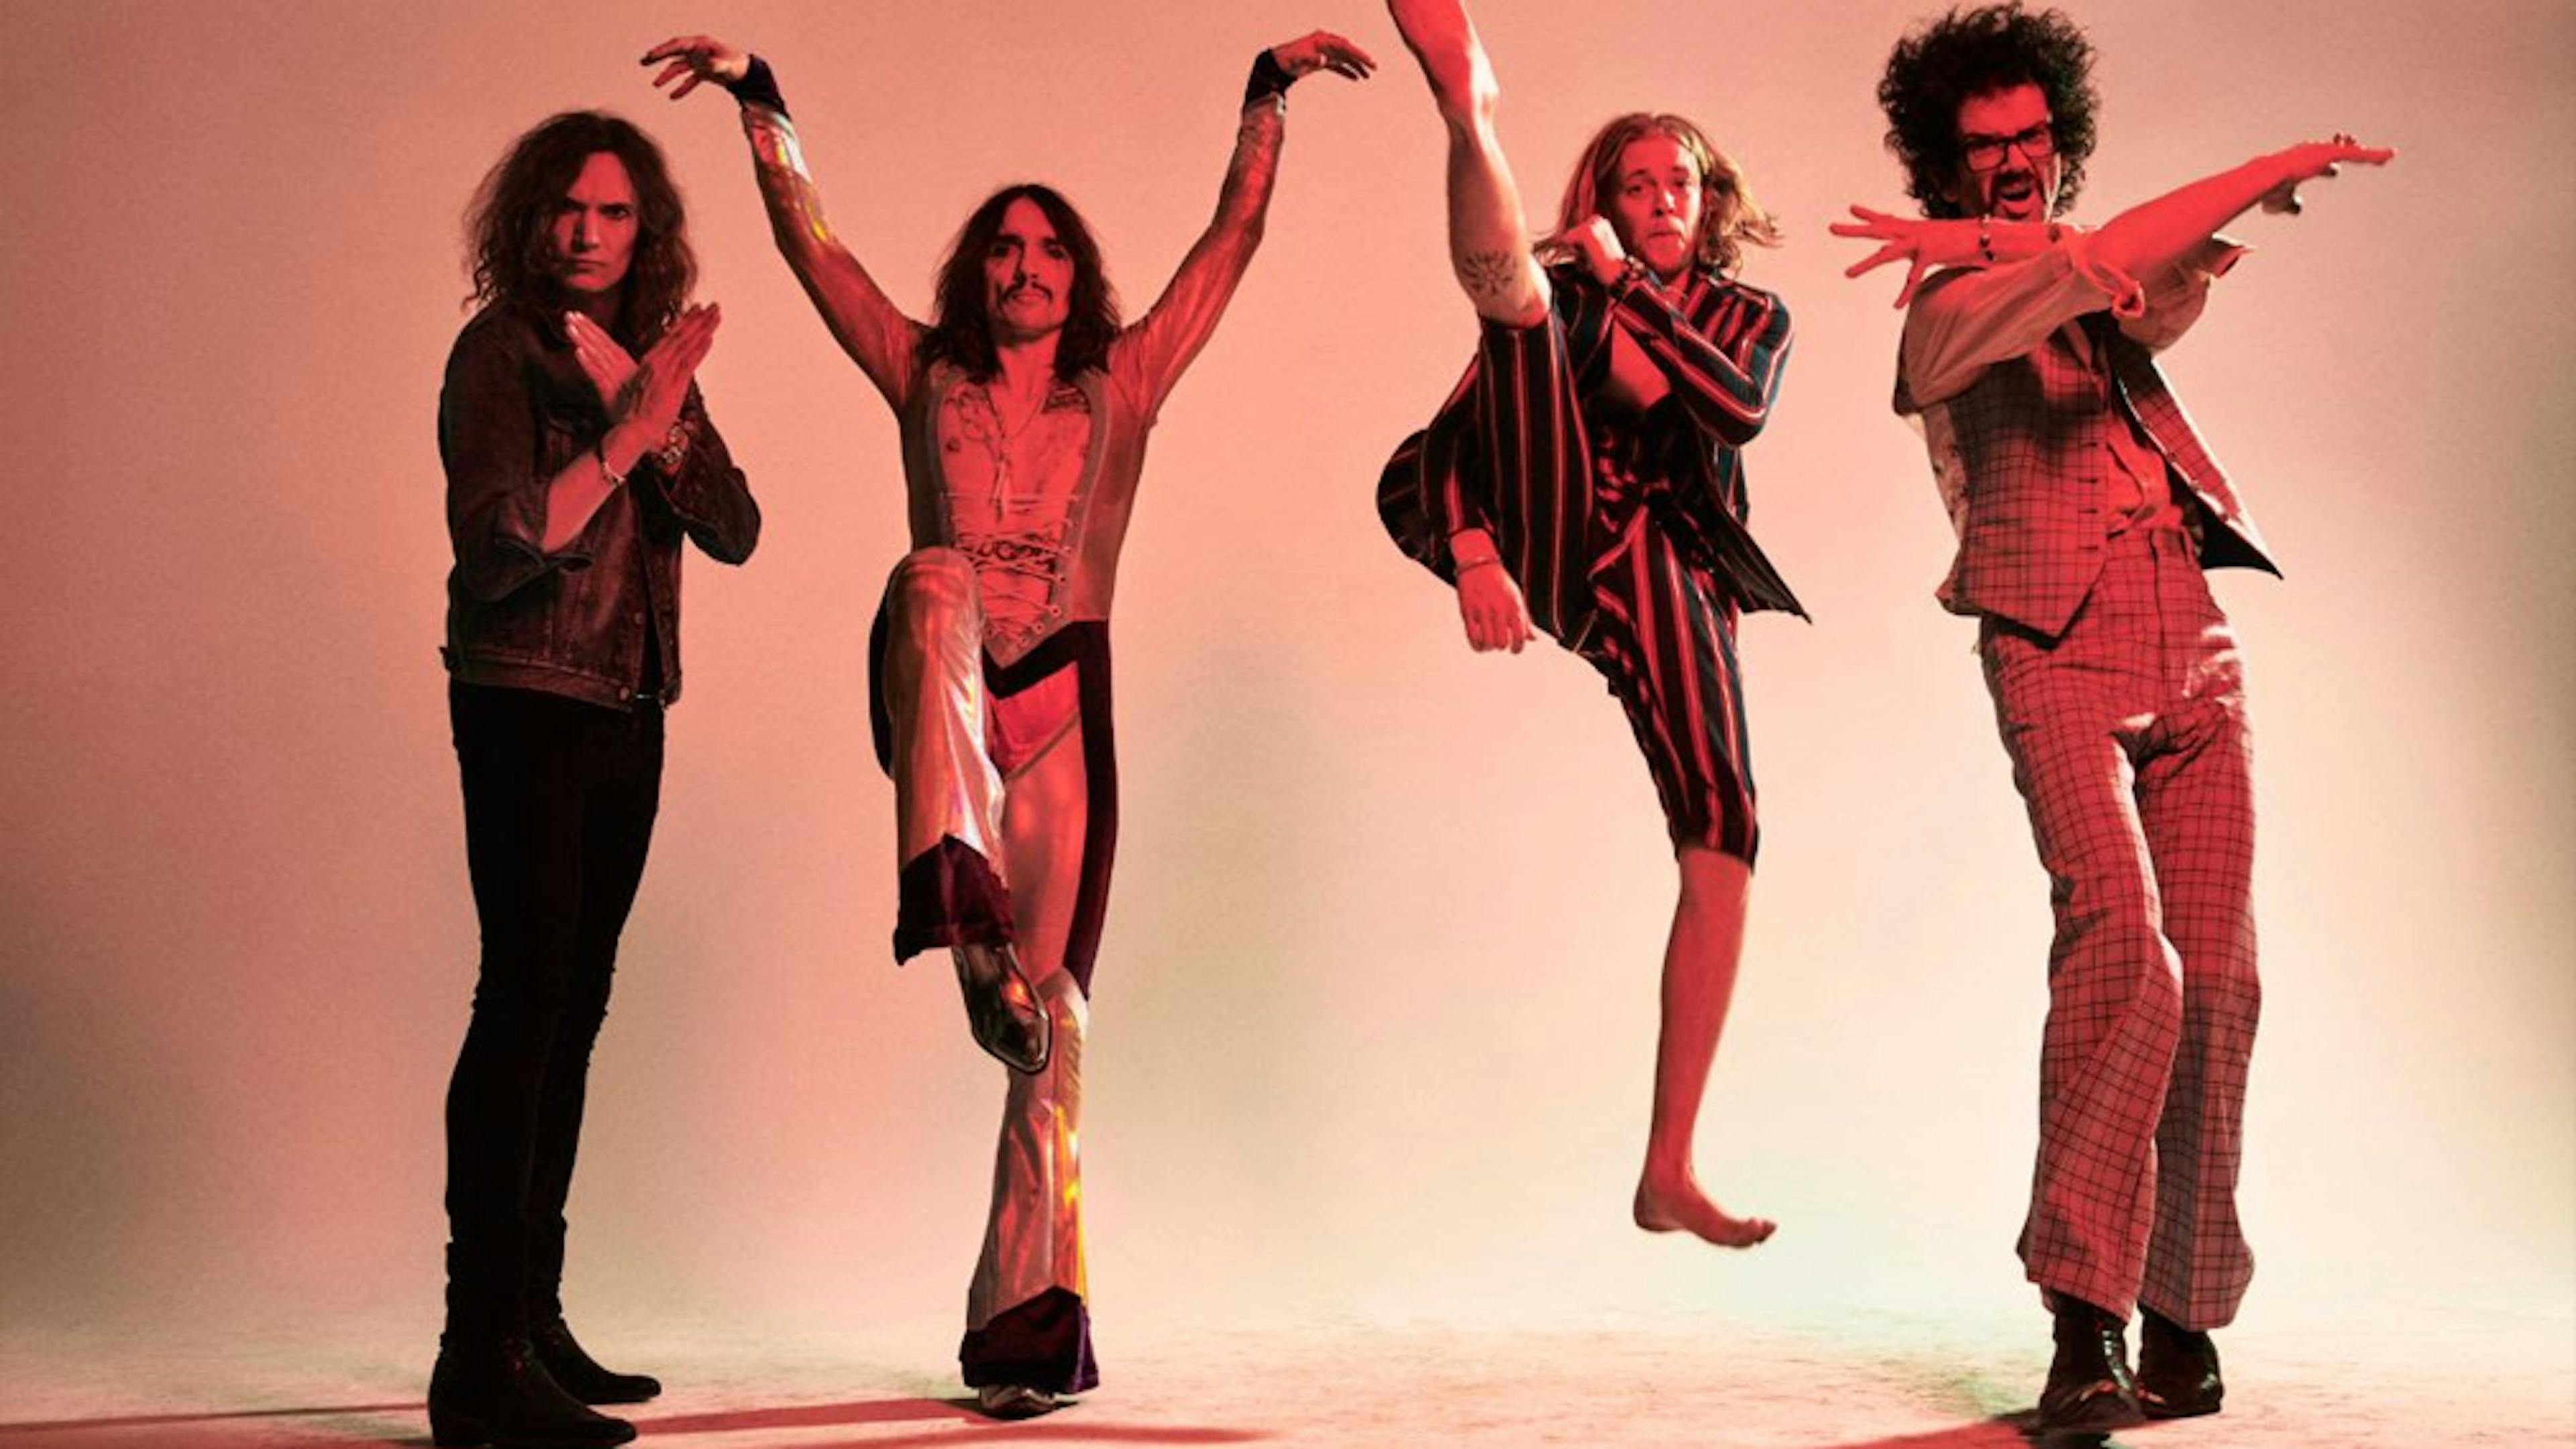 The Darkness Announce Easter Is Cancelled Headline Tour